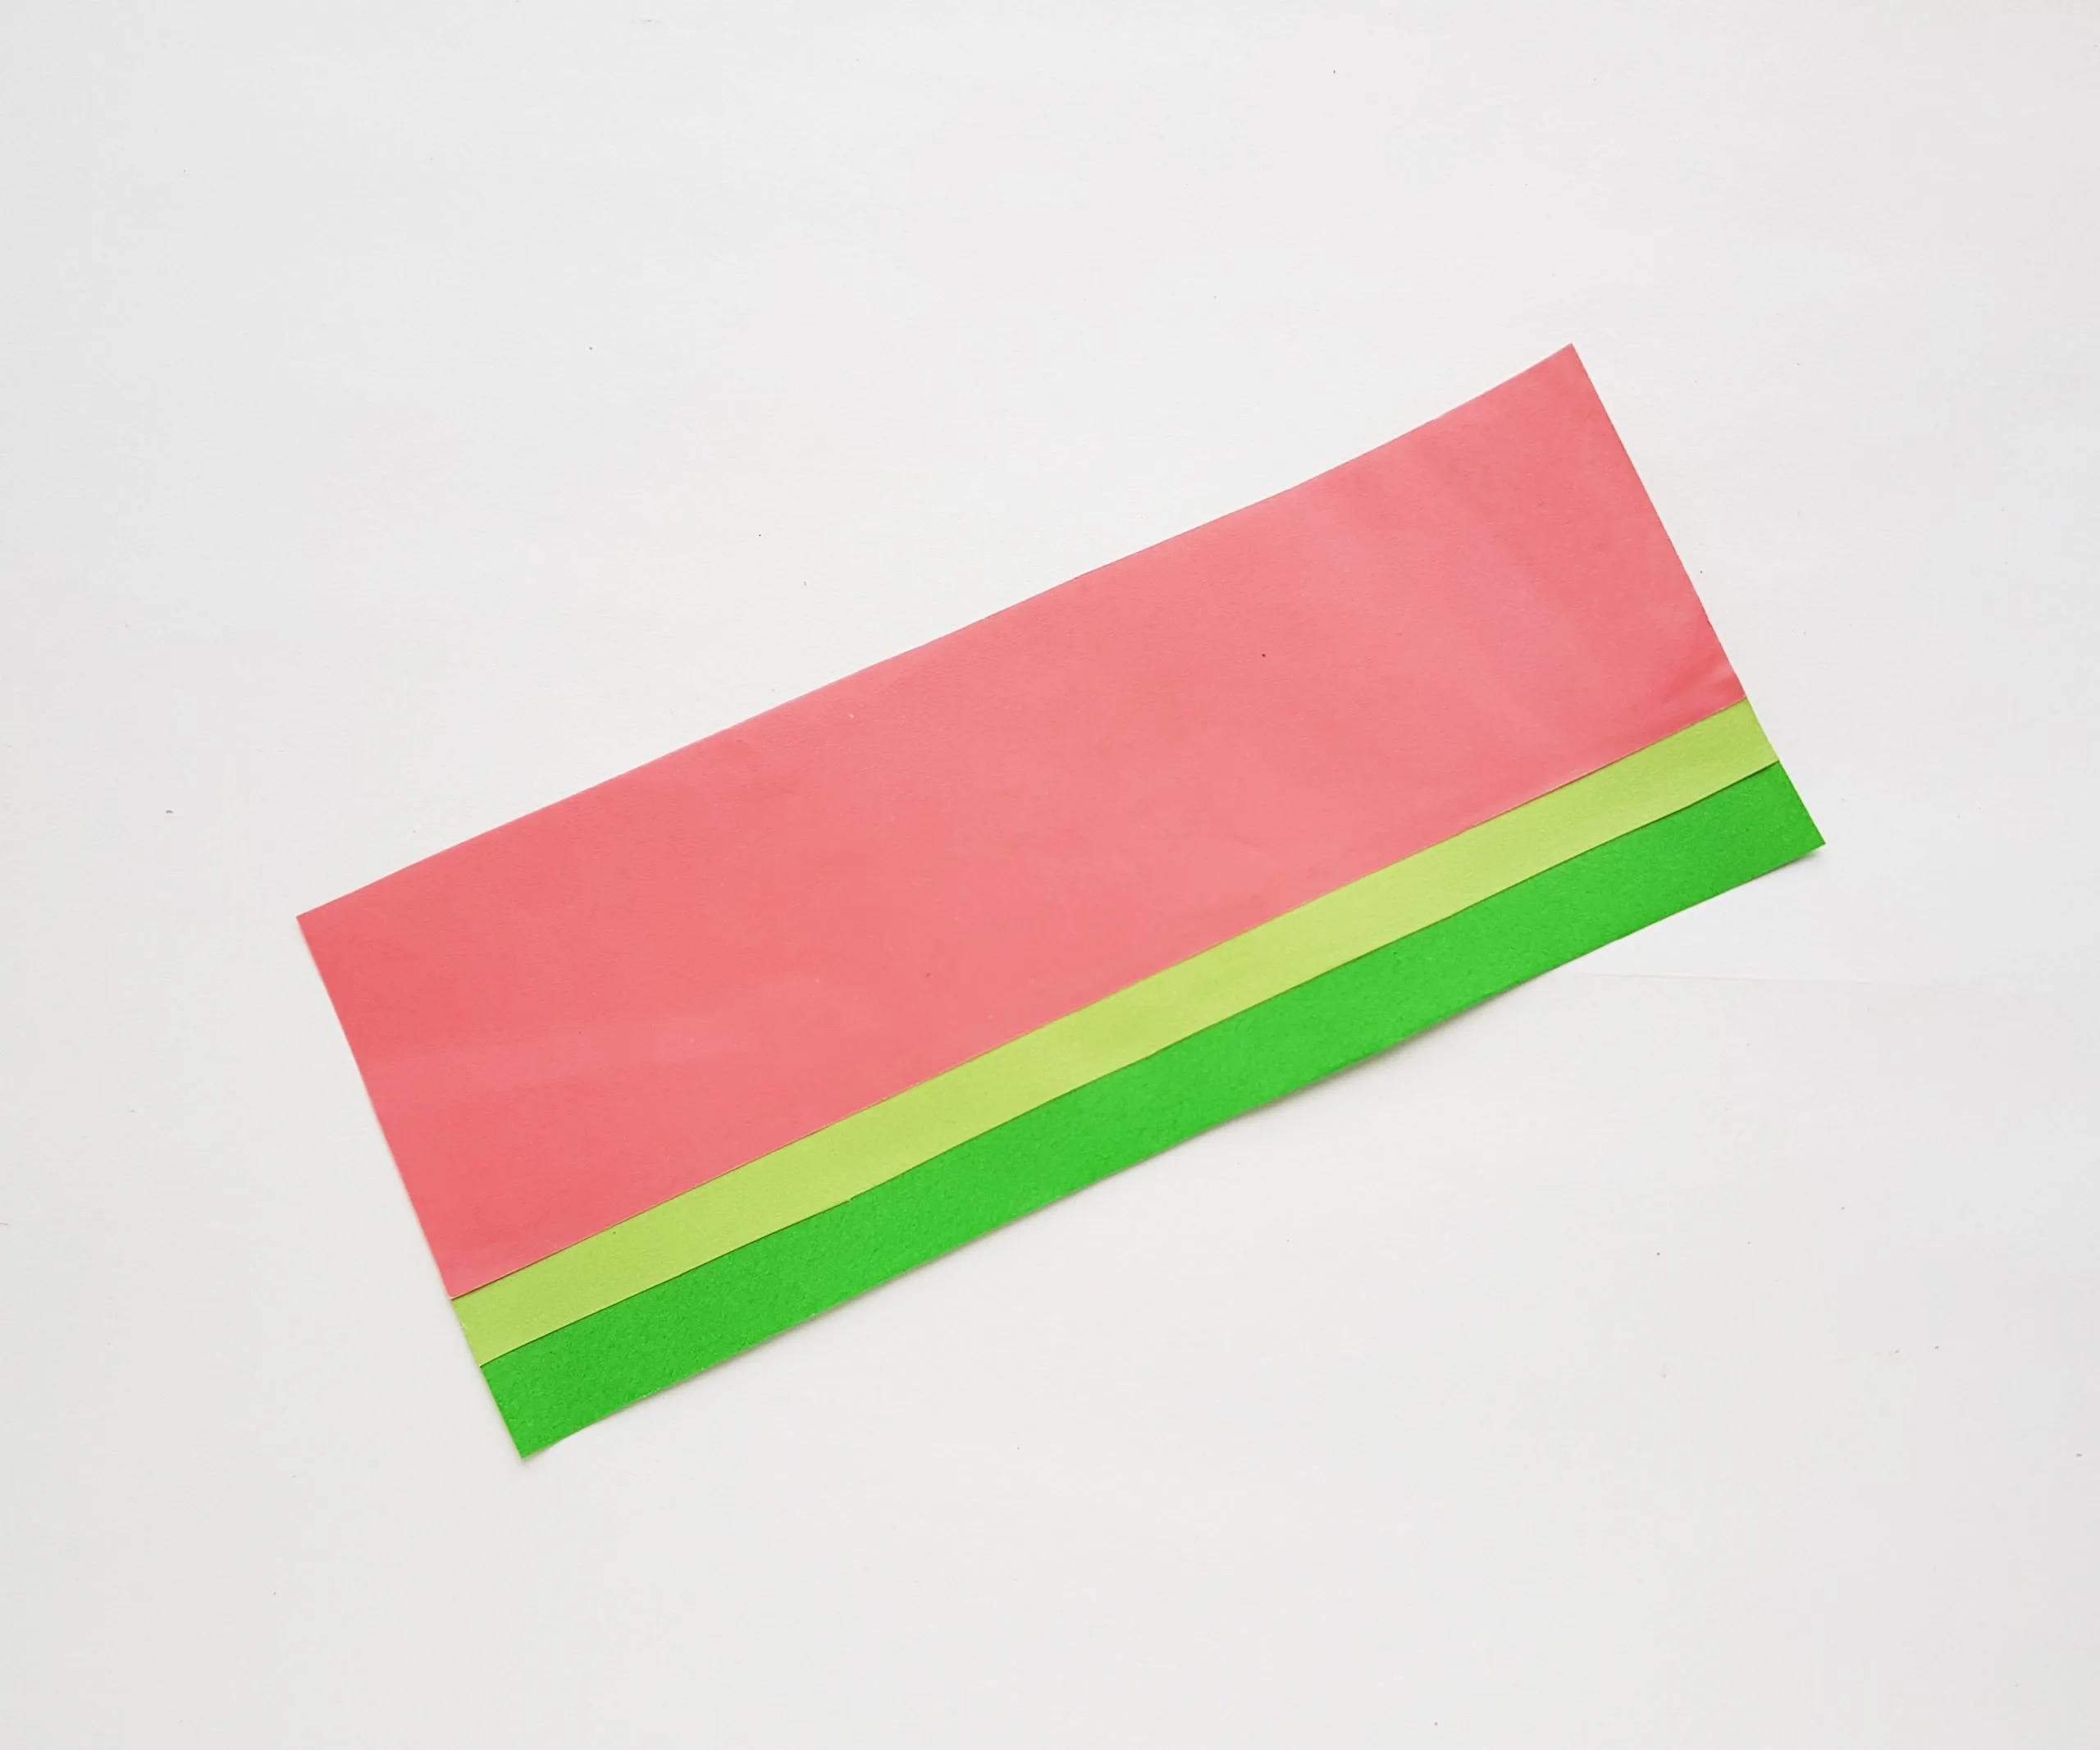 watermelon fan step by step craft with paper and scissors